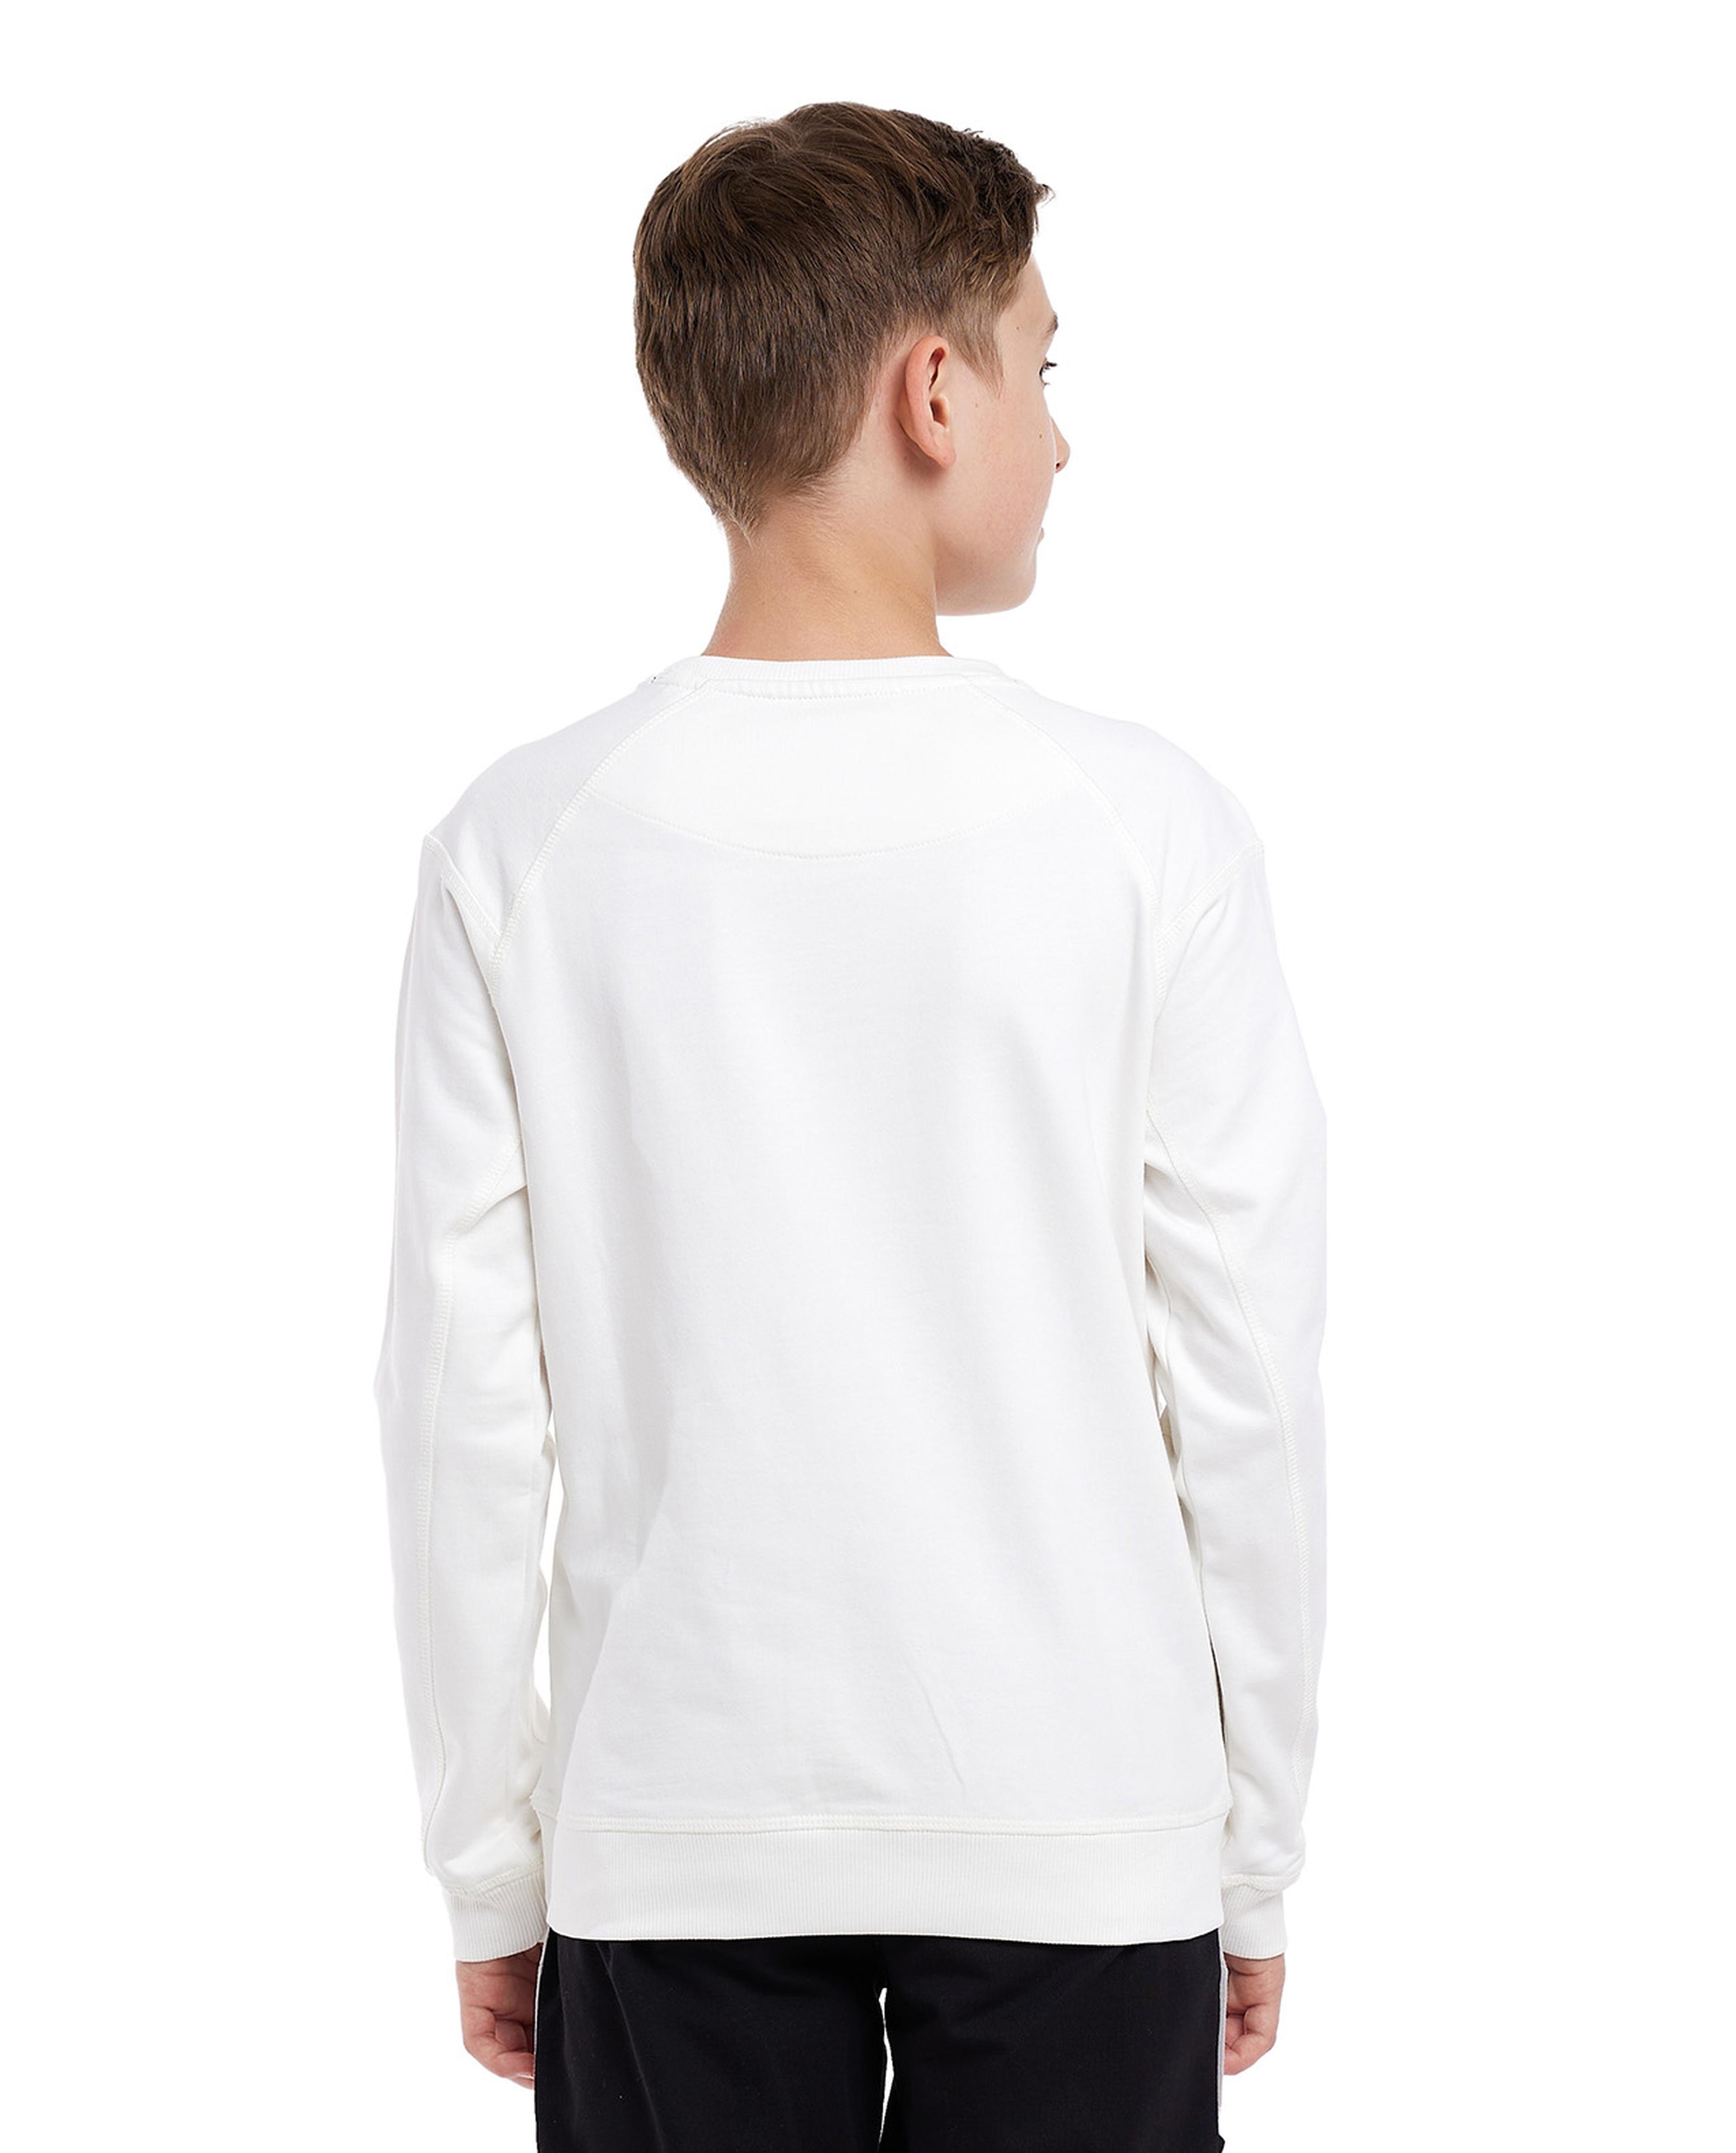 Applique Sweatshirt with Crew Neck and Long Sleeves